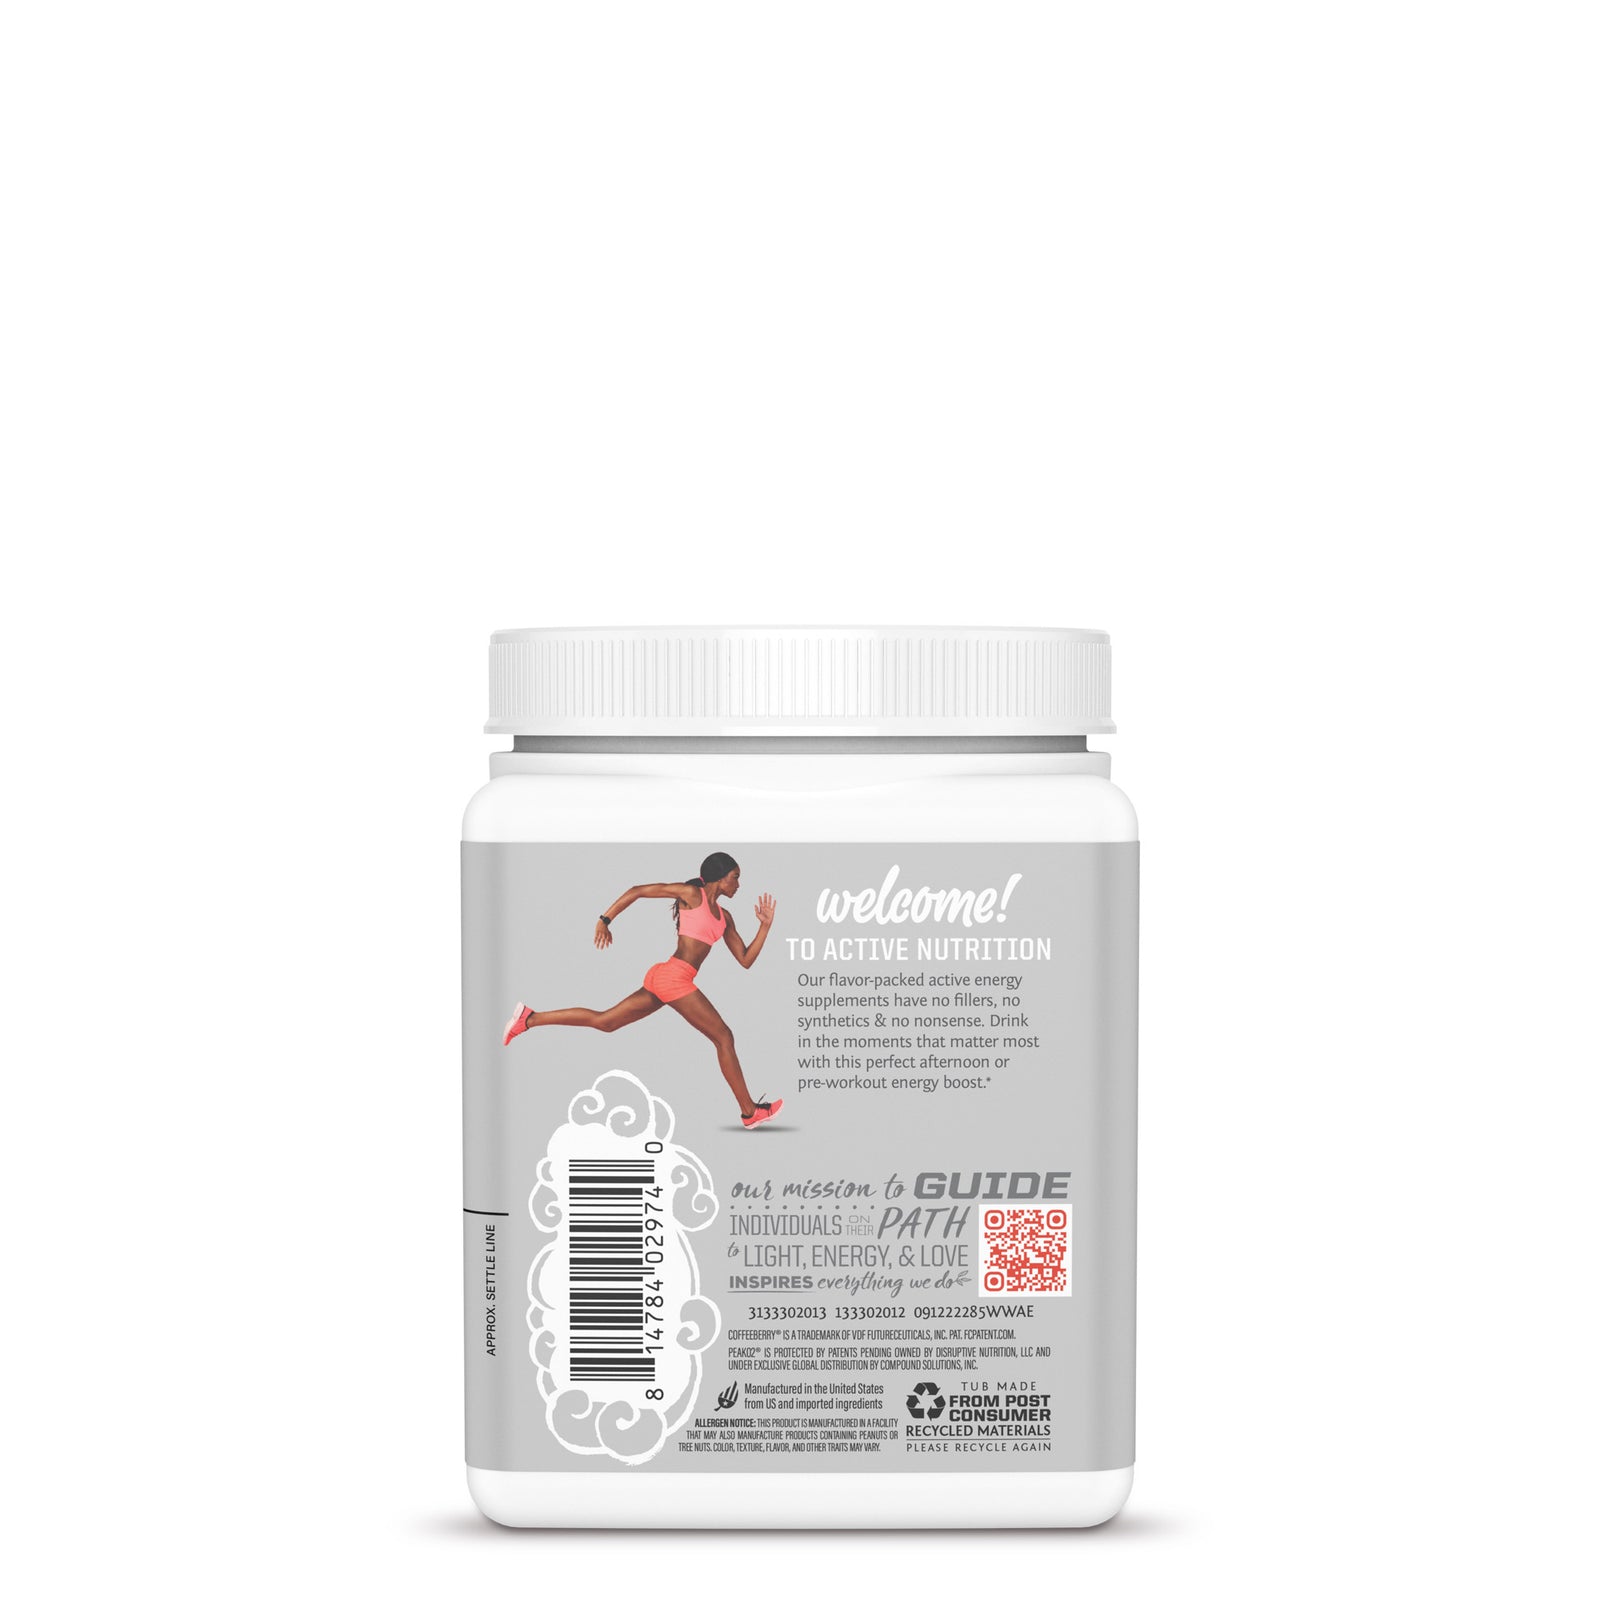 Pre-Workout Supplement with Peak02 - 540 Performance